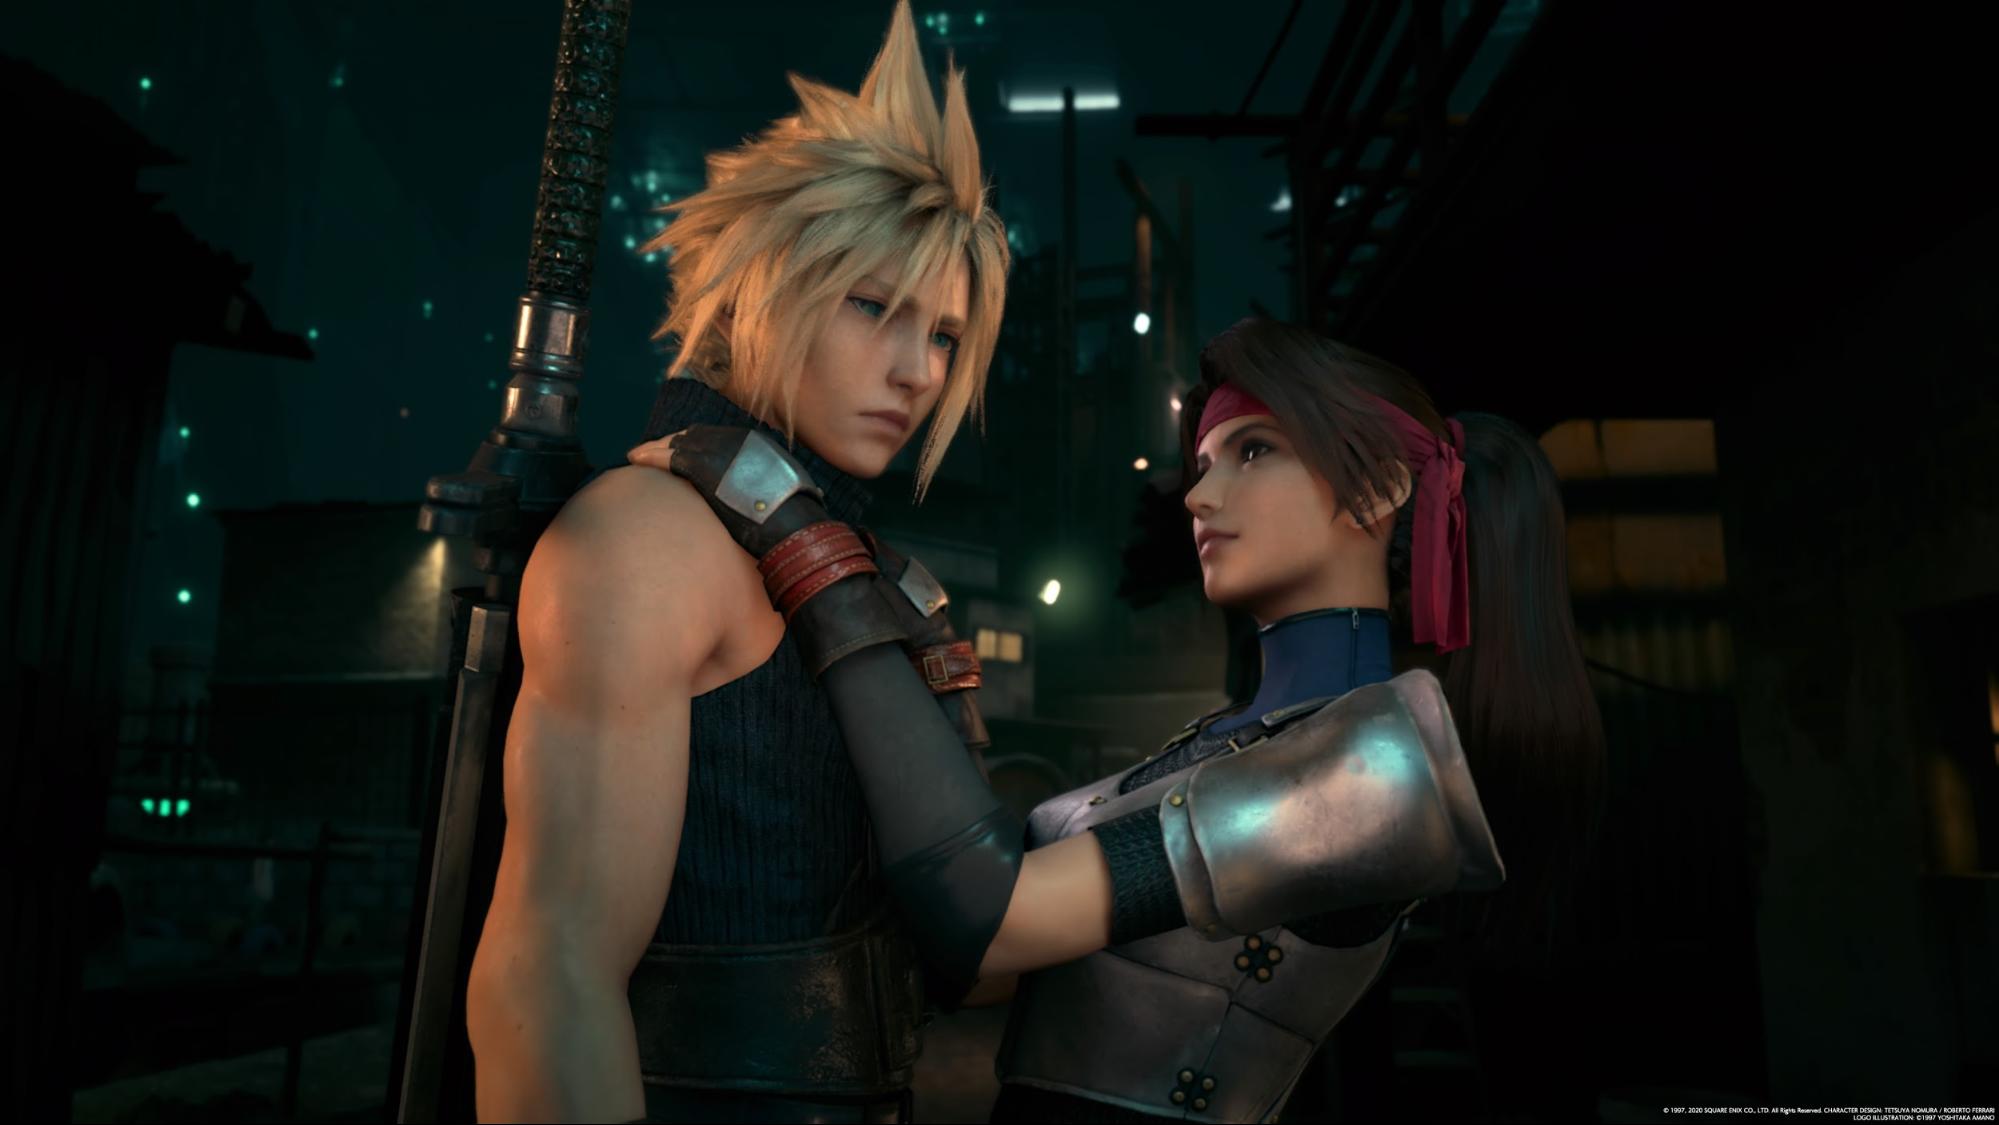 Ff7 Remake Review Worth Buying Just For The Cute New Tifa Aerith And Jessie Models Engadget 日本版